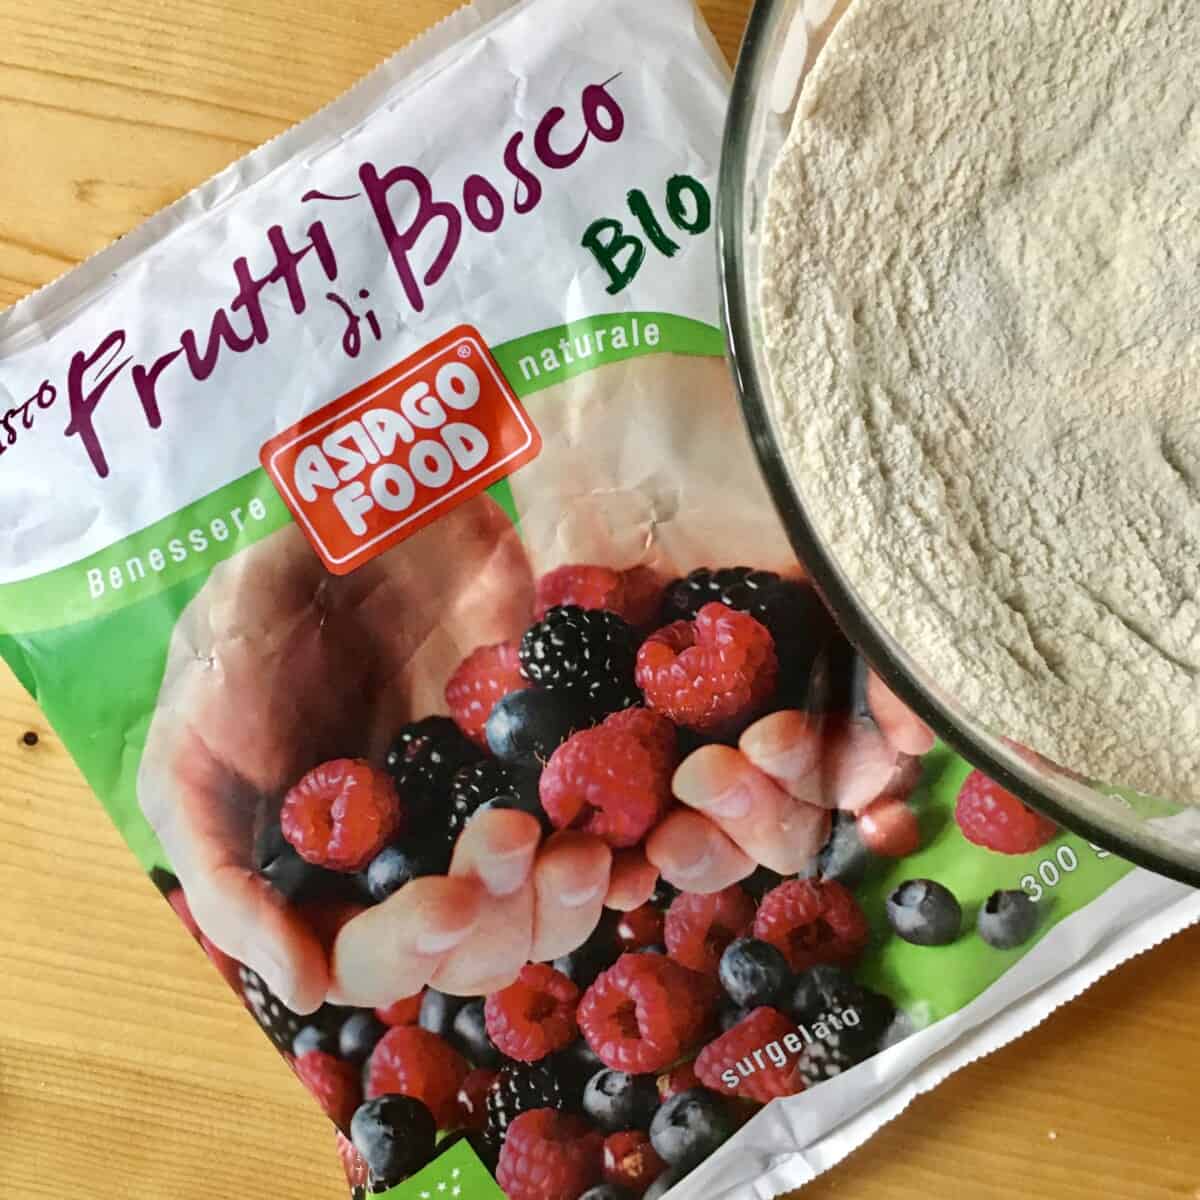 bag of organic frutti di bosco frozen fruit next to a bowl of mixed dry muffin ingredients